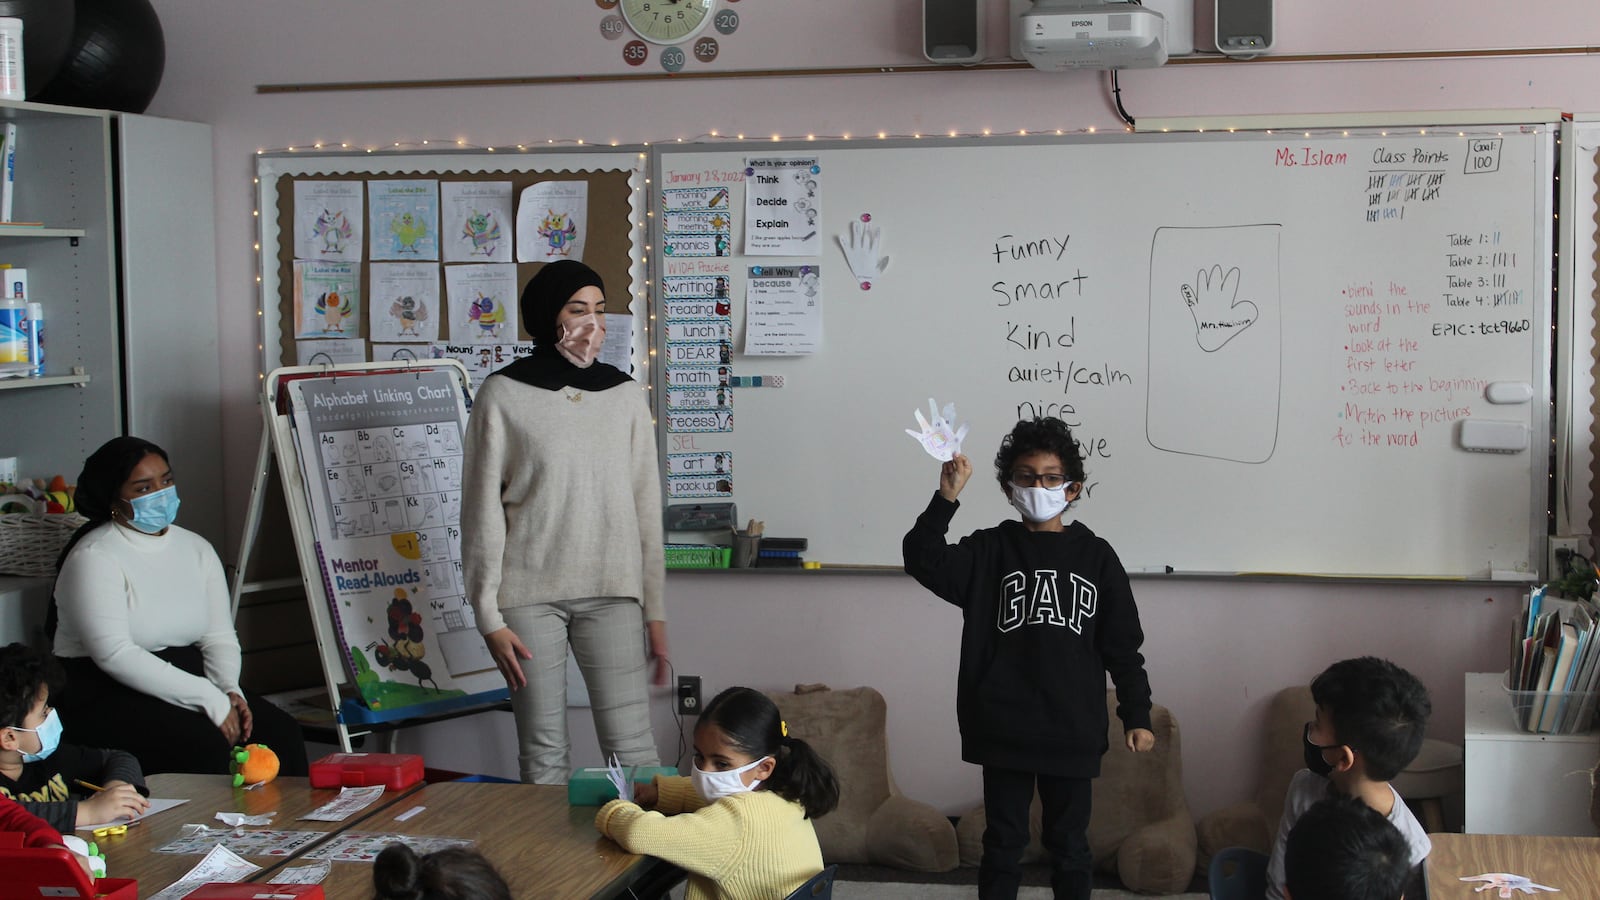 a child in black sweater holds up a paper hand standing next to a teacher at the front of the classroom